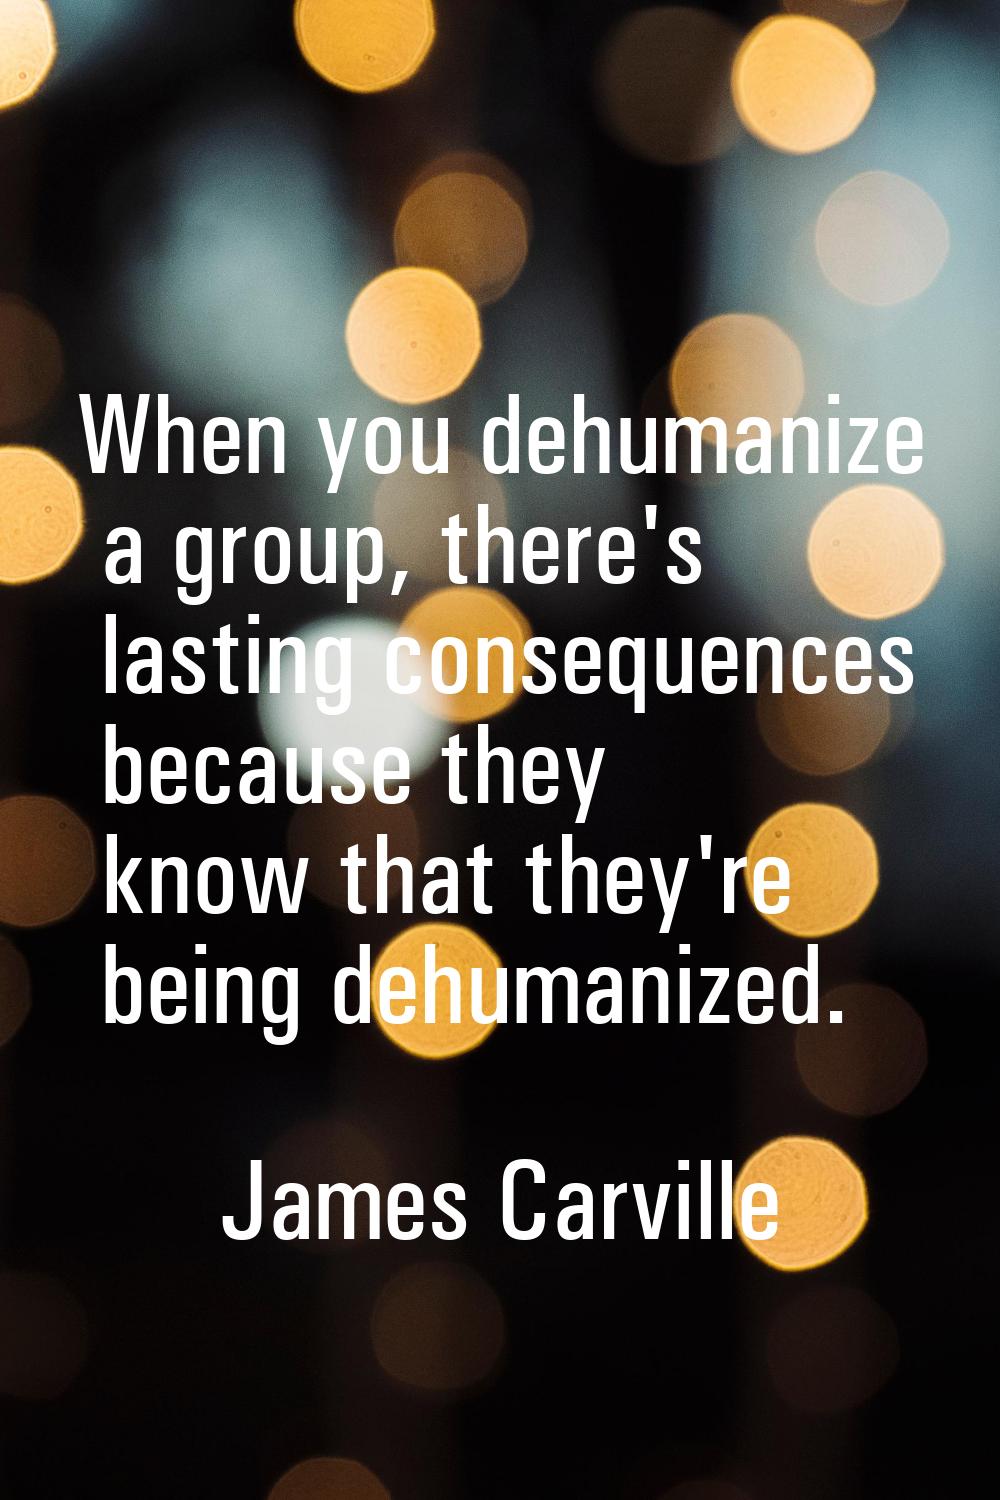 When you dehumanize a group, there's lasting consequences because they know that they're being dehu